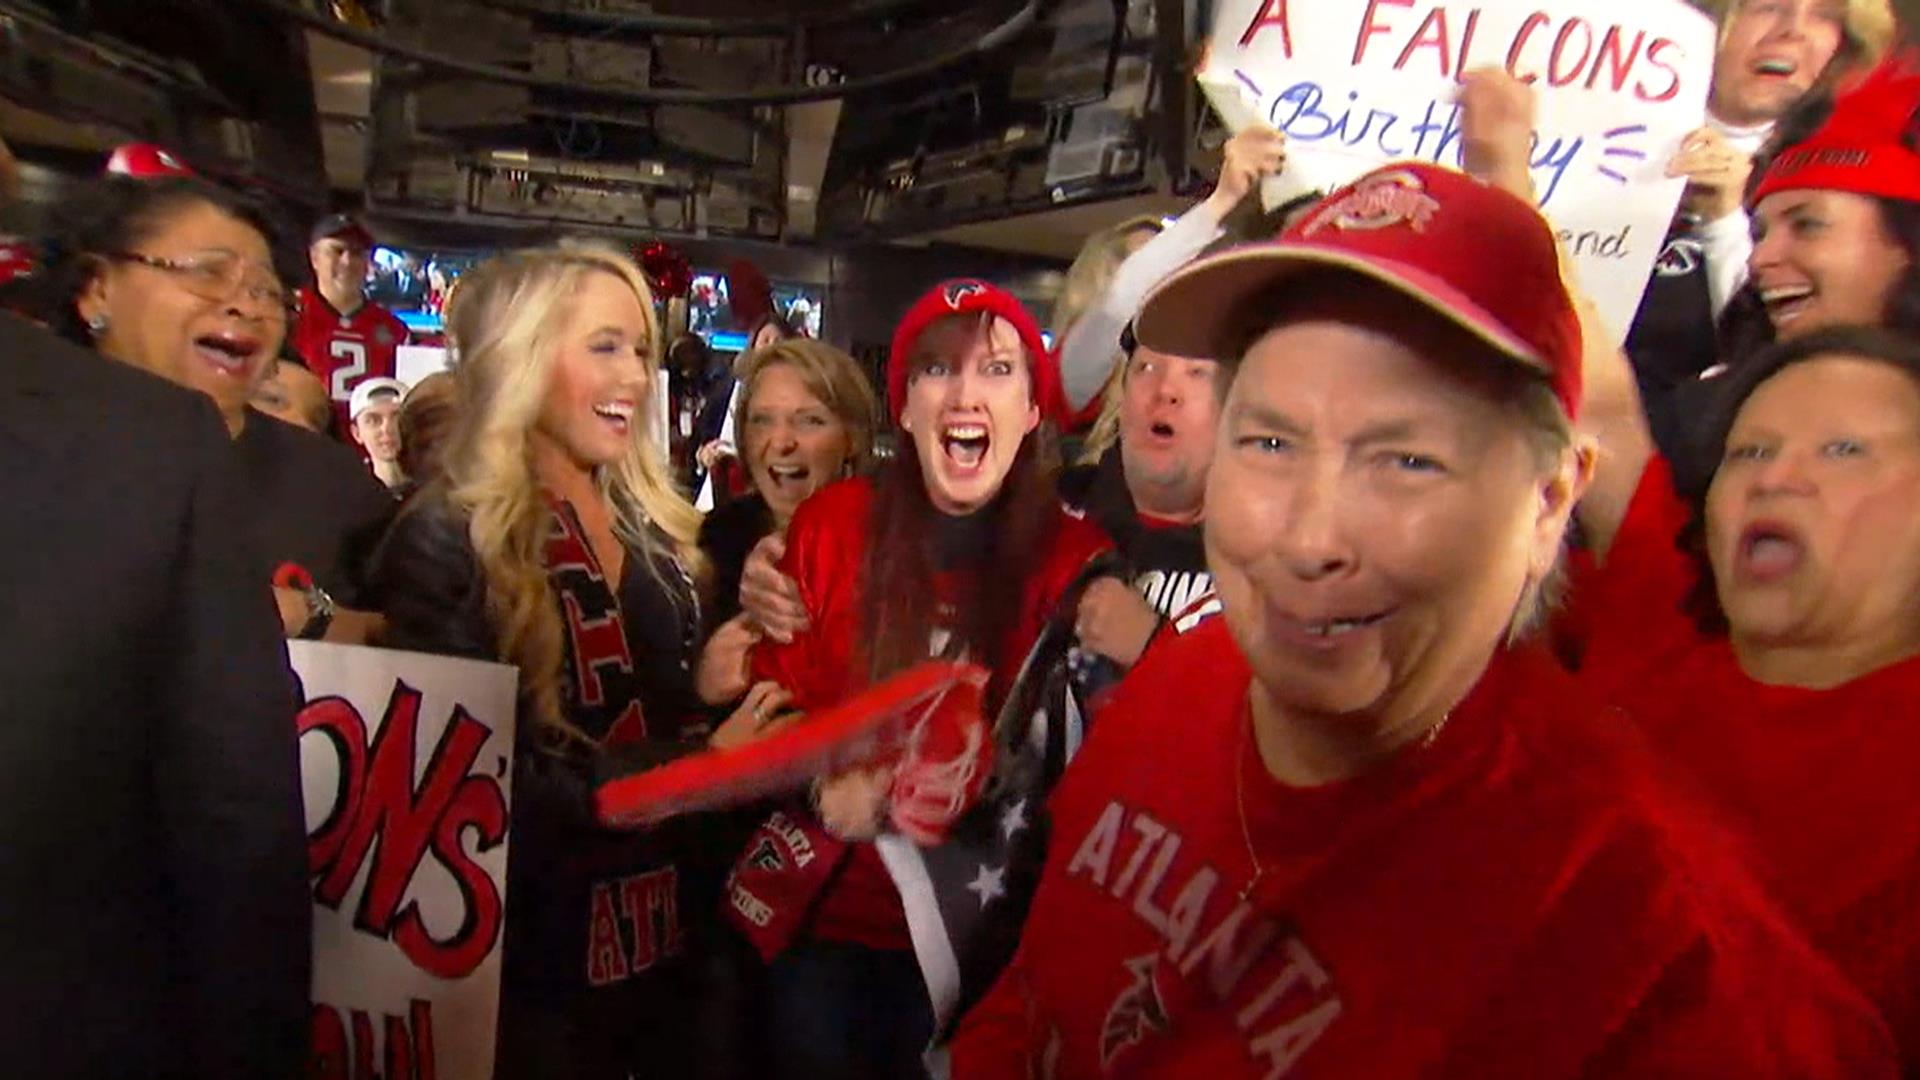 These Falcons fans go wild when they get free Super Bowl tickets